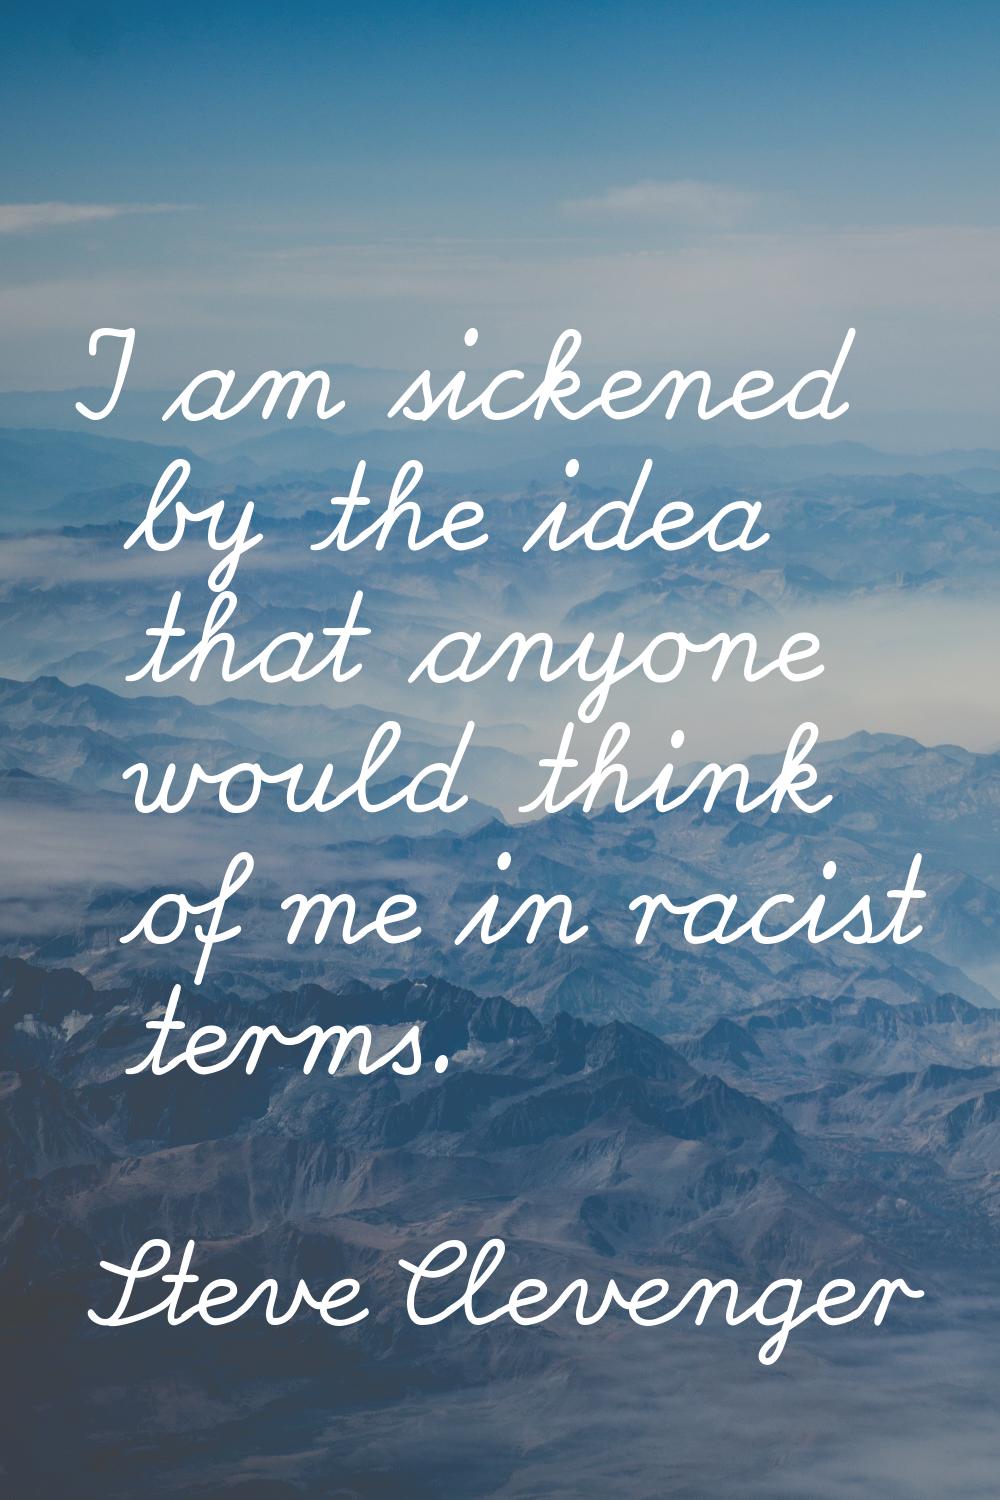 I am sickened by the idea that anyone would think of me in racist terms.